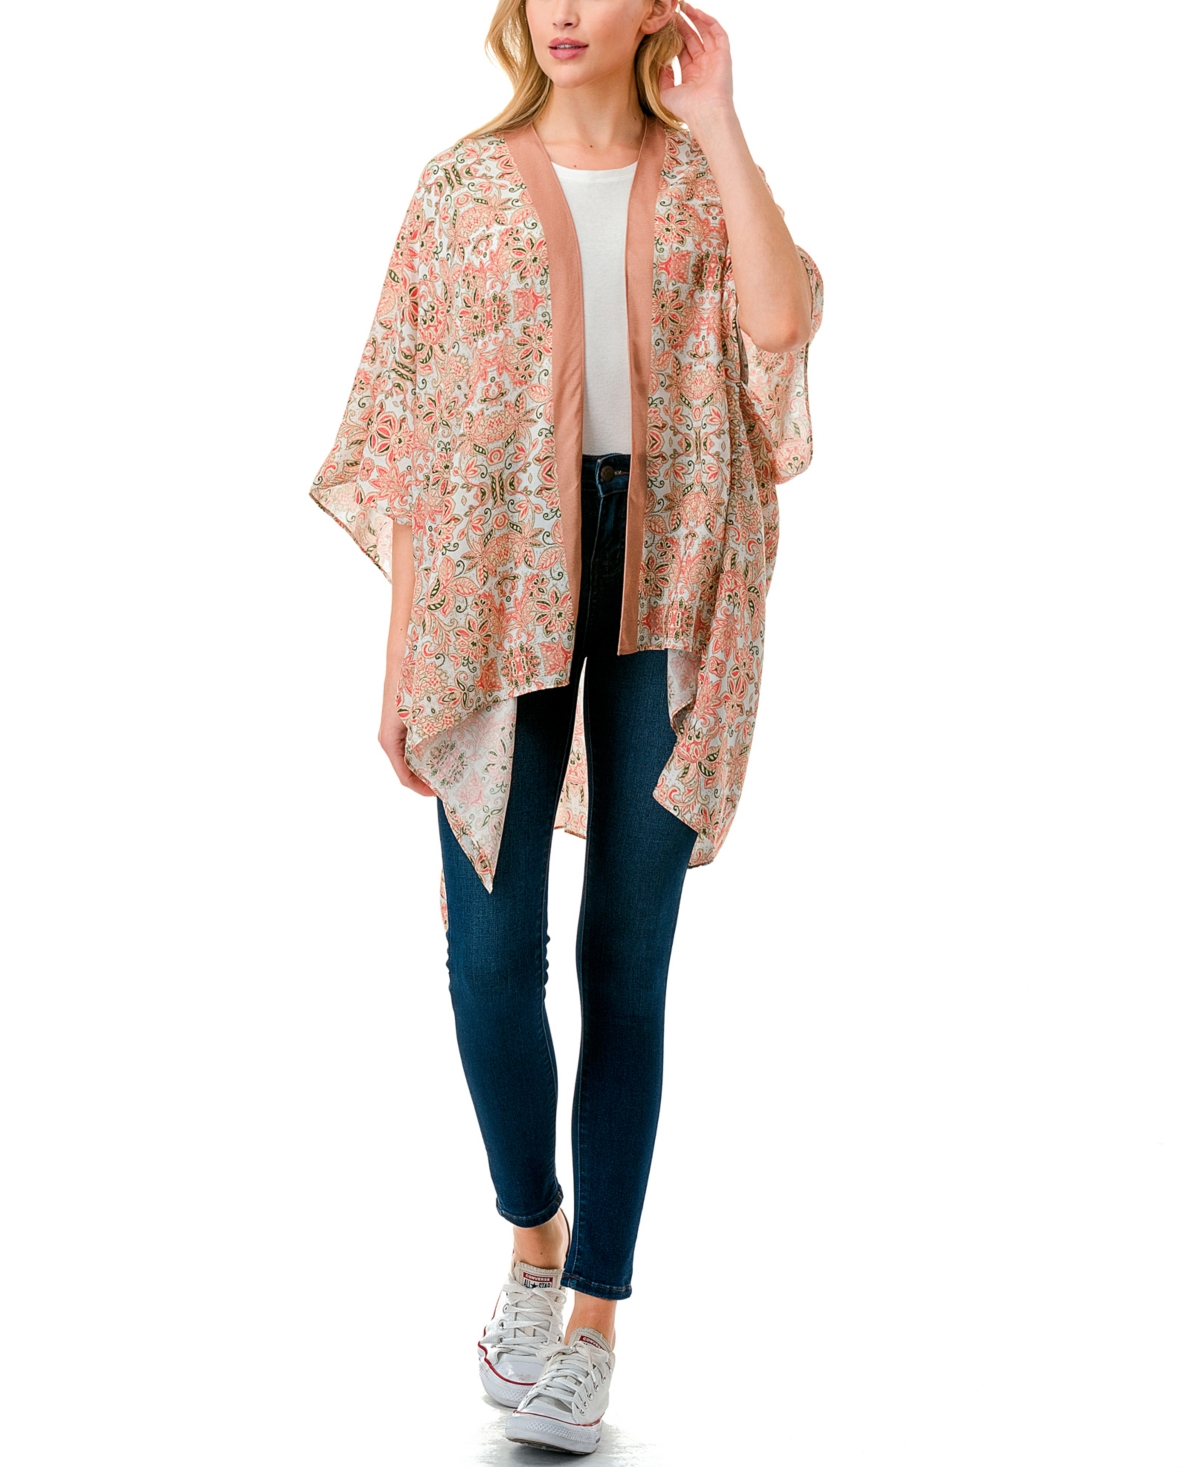 Marcus Adler Floral Kimono Cover Up In Blush